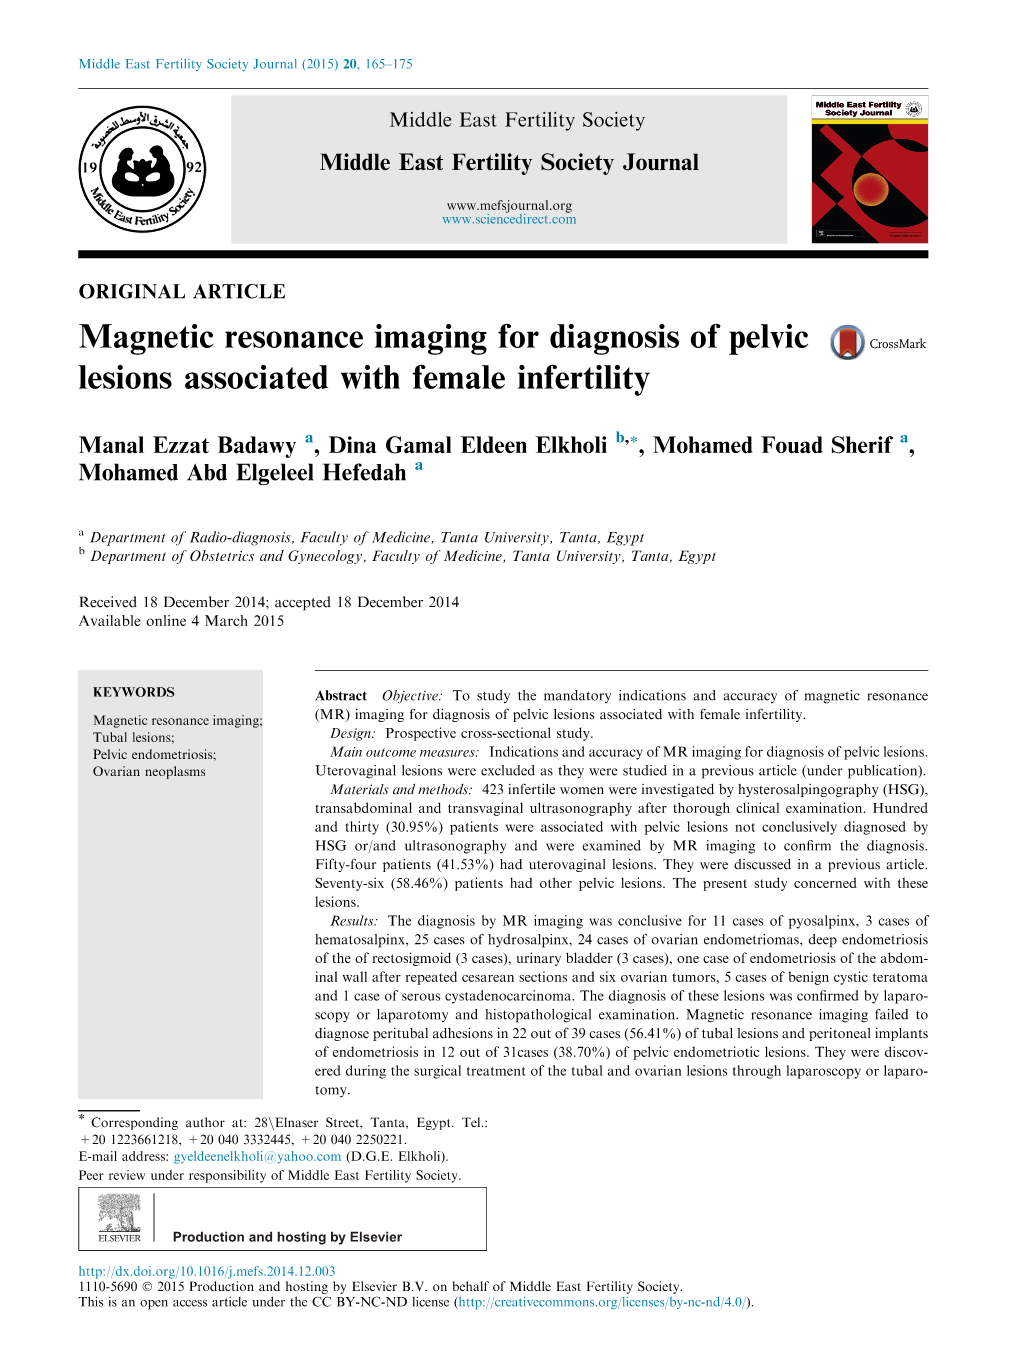 Magnetic Resonance Imaging for Diagnosis of Pelvic Lesions Associated with Female Infertility